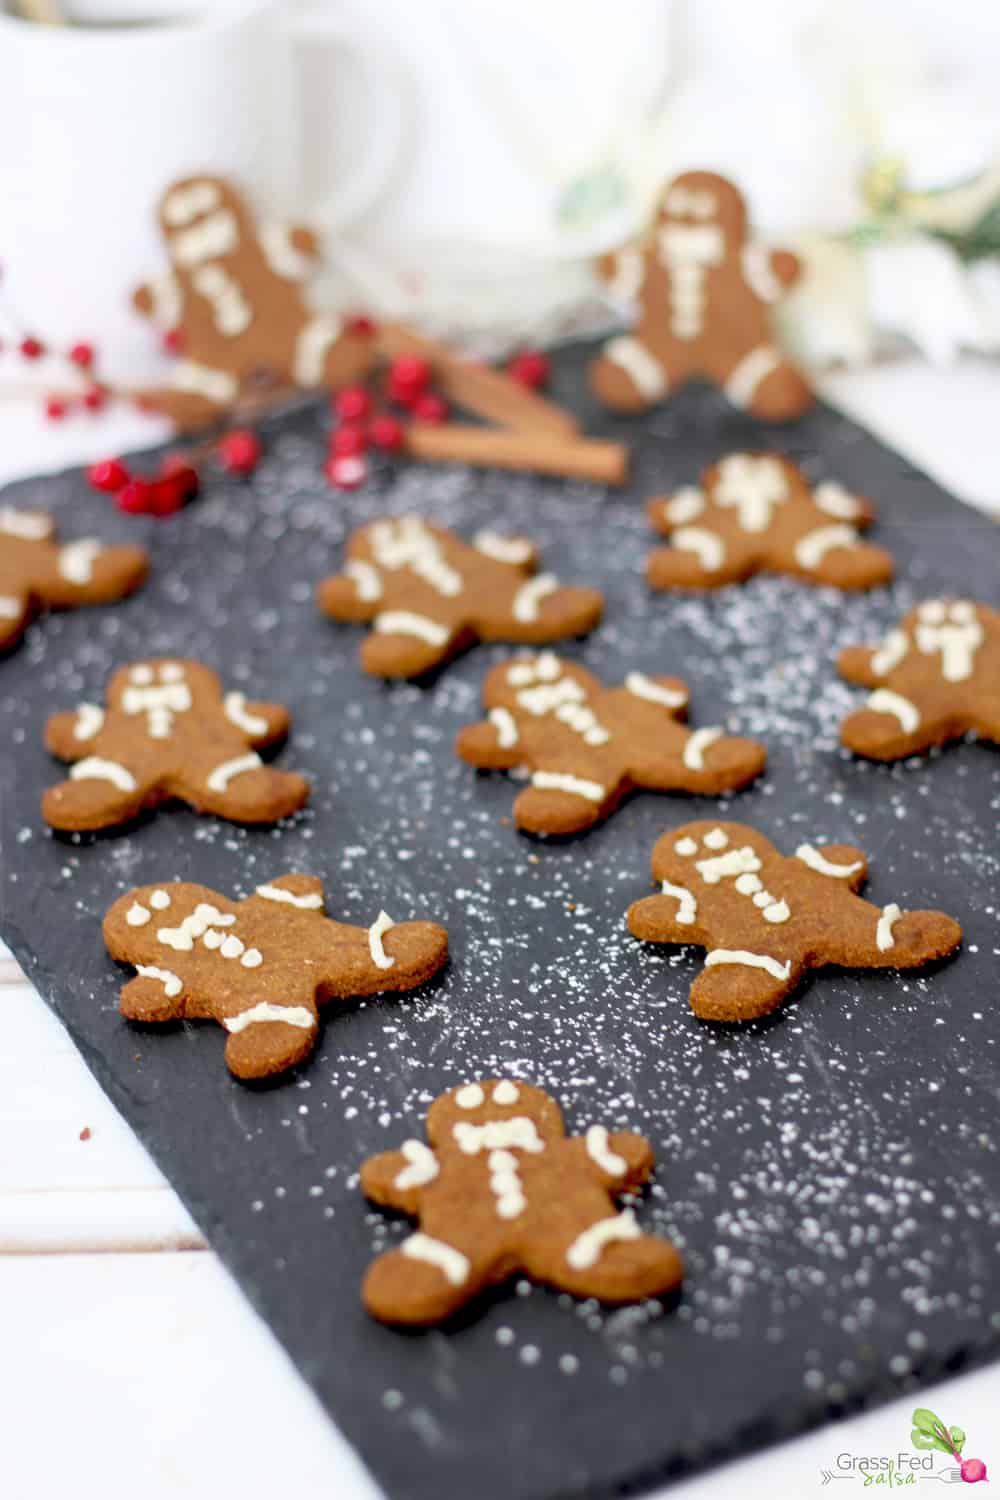 Gingerbread Cookies are a must have during the holidays. This Autoimmune Protocol (AIP) friendly recipe is the perfect replacement for your traditional recipe. Get it along with a FREE 50 page ebook full of Paleo treats and drinks for the holidays.